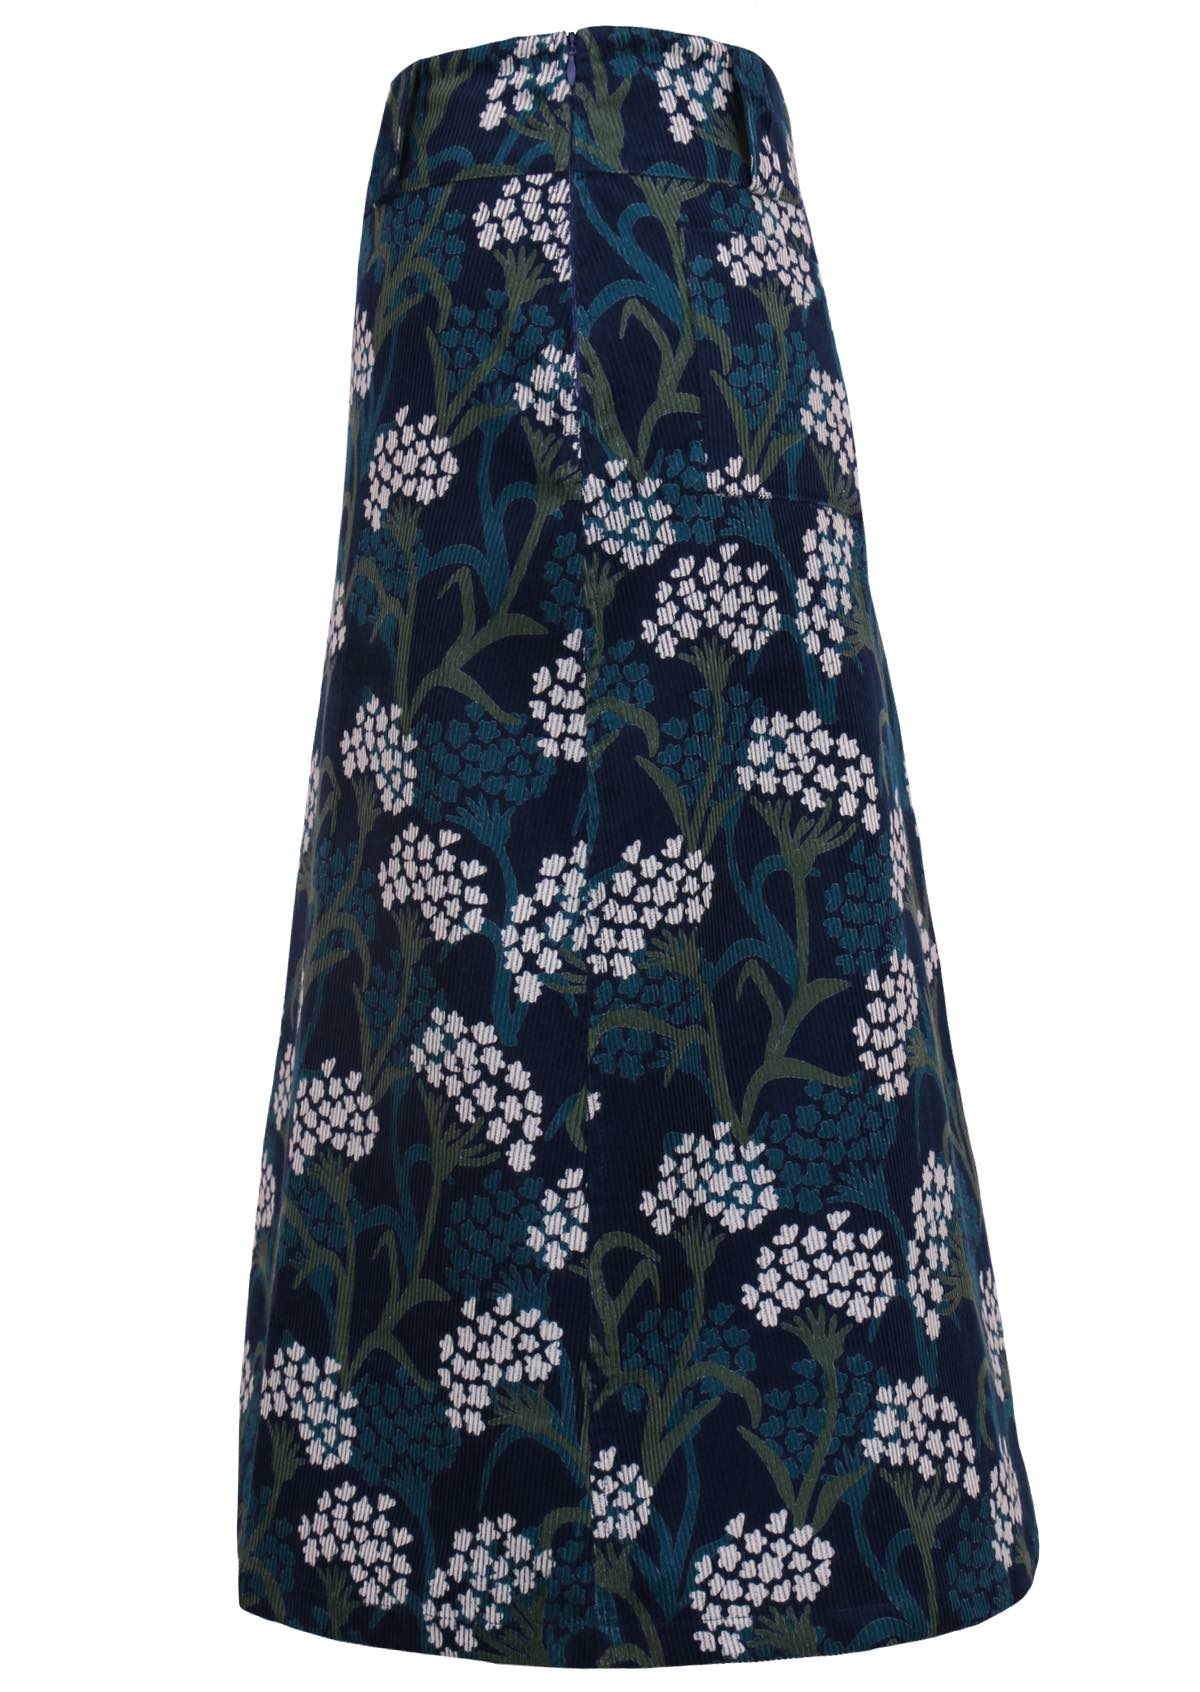 Blue based corduroy skirt with a yarrow flower print features belt loops. 